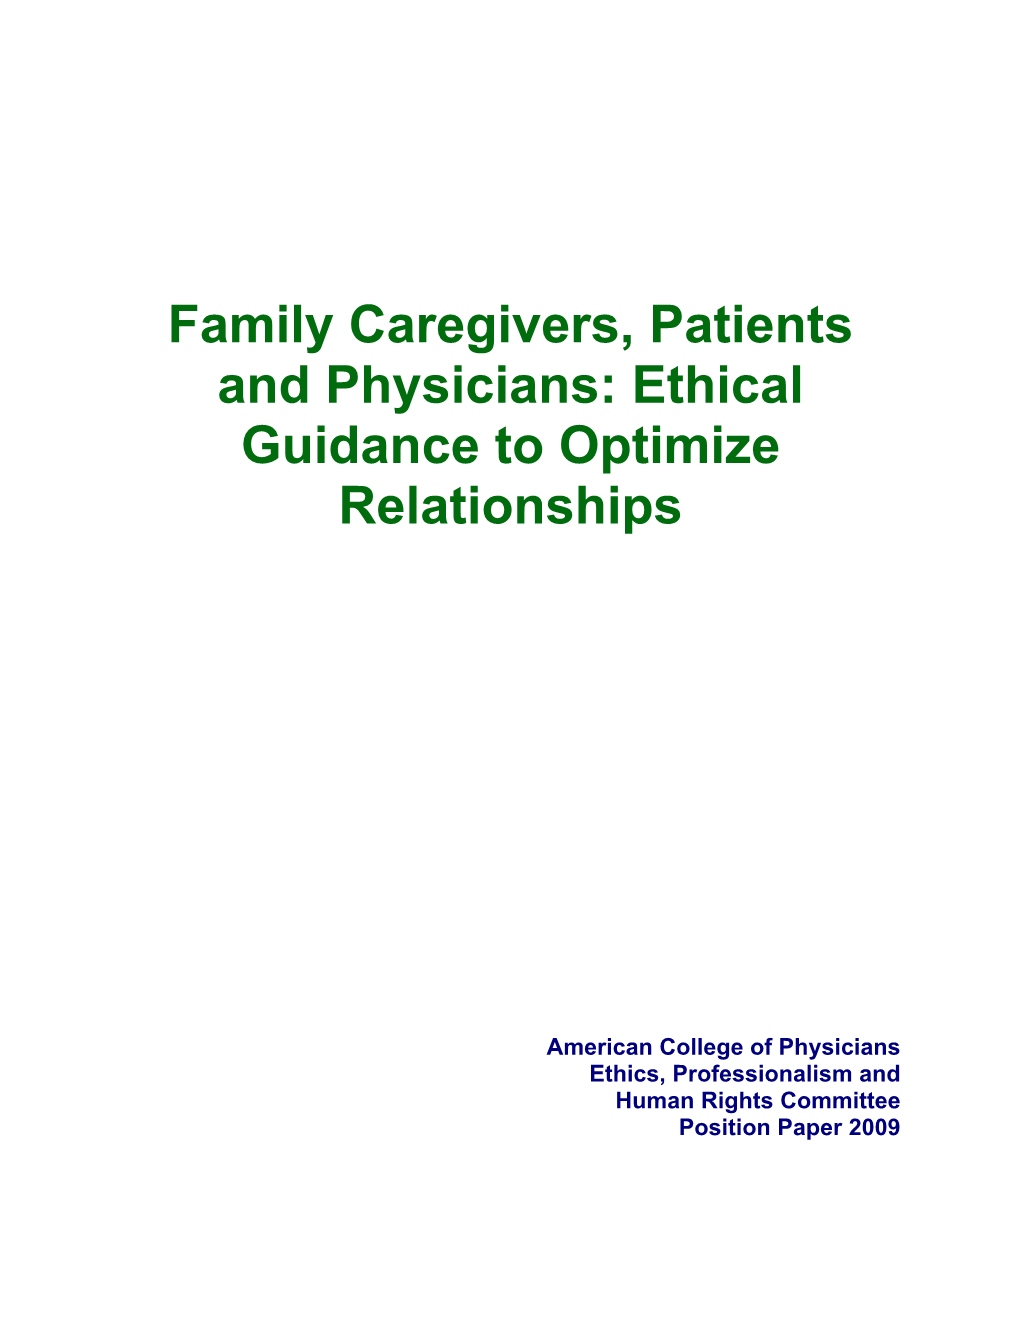 Family Caregivers, Patients and Physicians: Ethical Guidance to Optimize Relationships